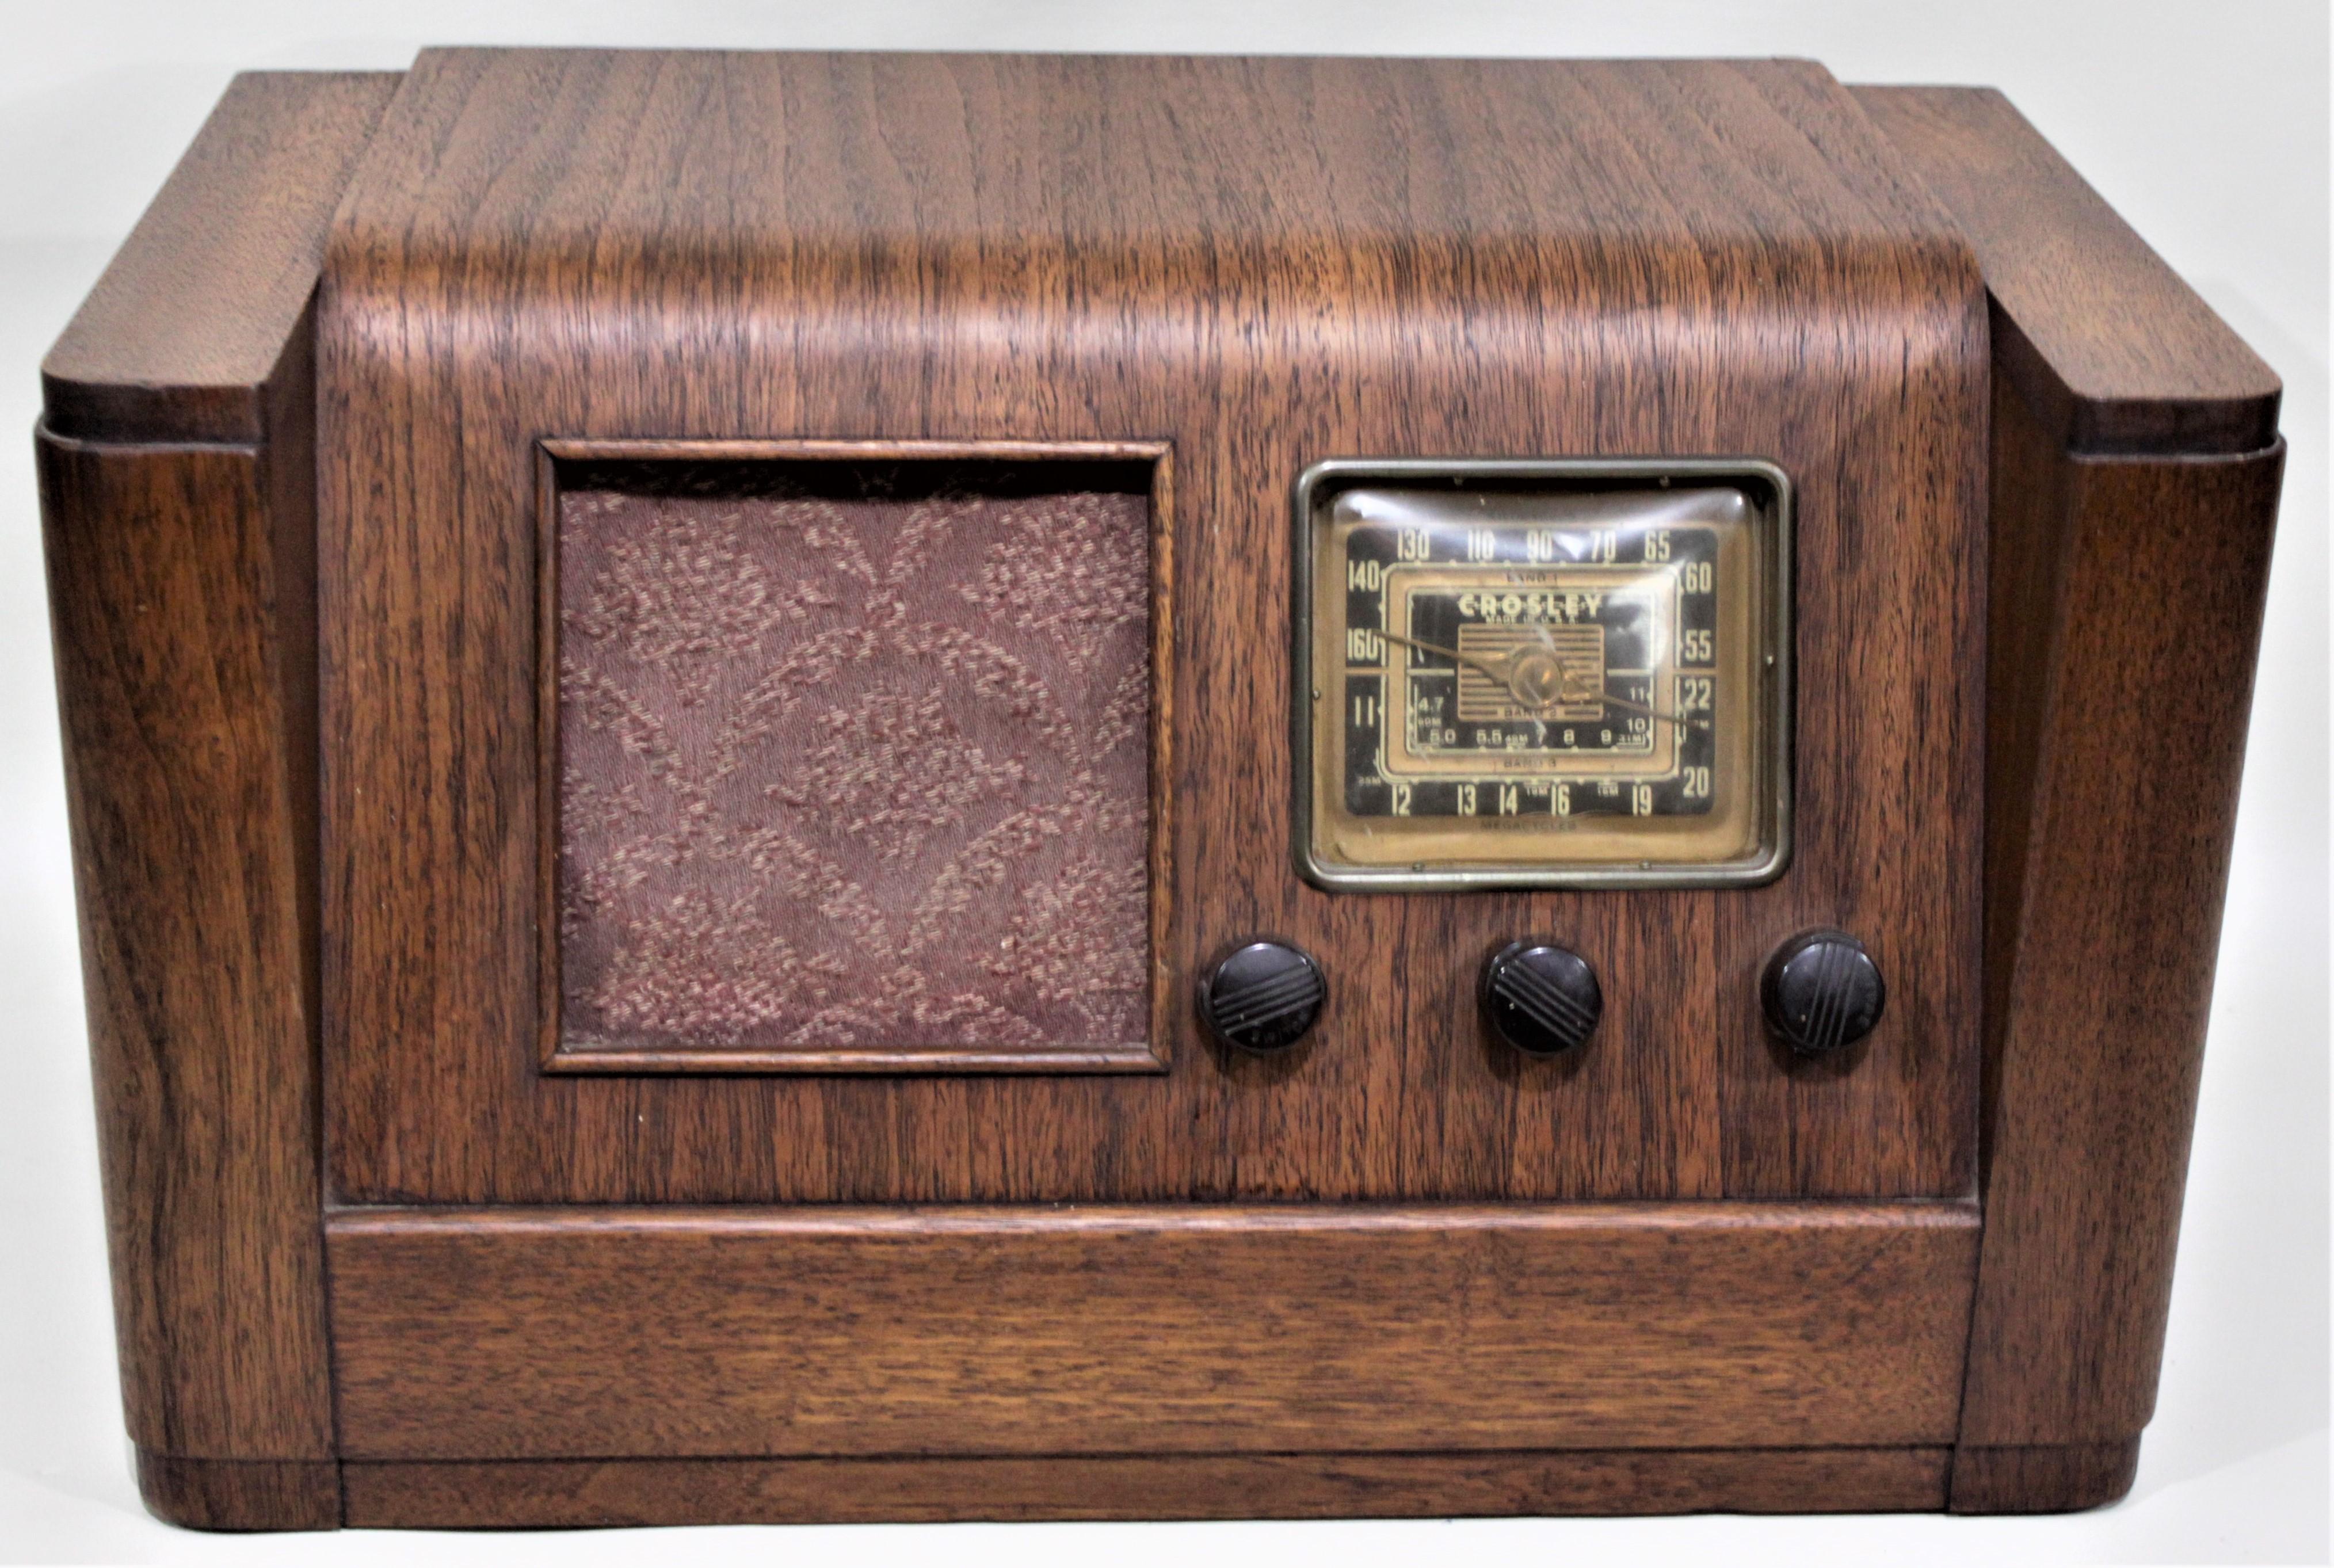 This vintage Crosley 3-band AM/shortwave radio was made in their Cincinnati factory in circa 1940 in the Mid-Century style. This radio is done in a walnut case with bakelite knobs and a chocolate brown and brass dial face and brass double needle